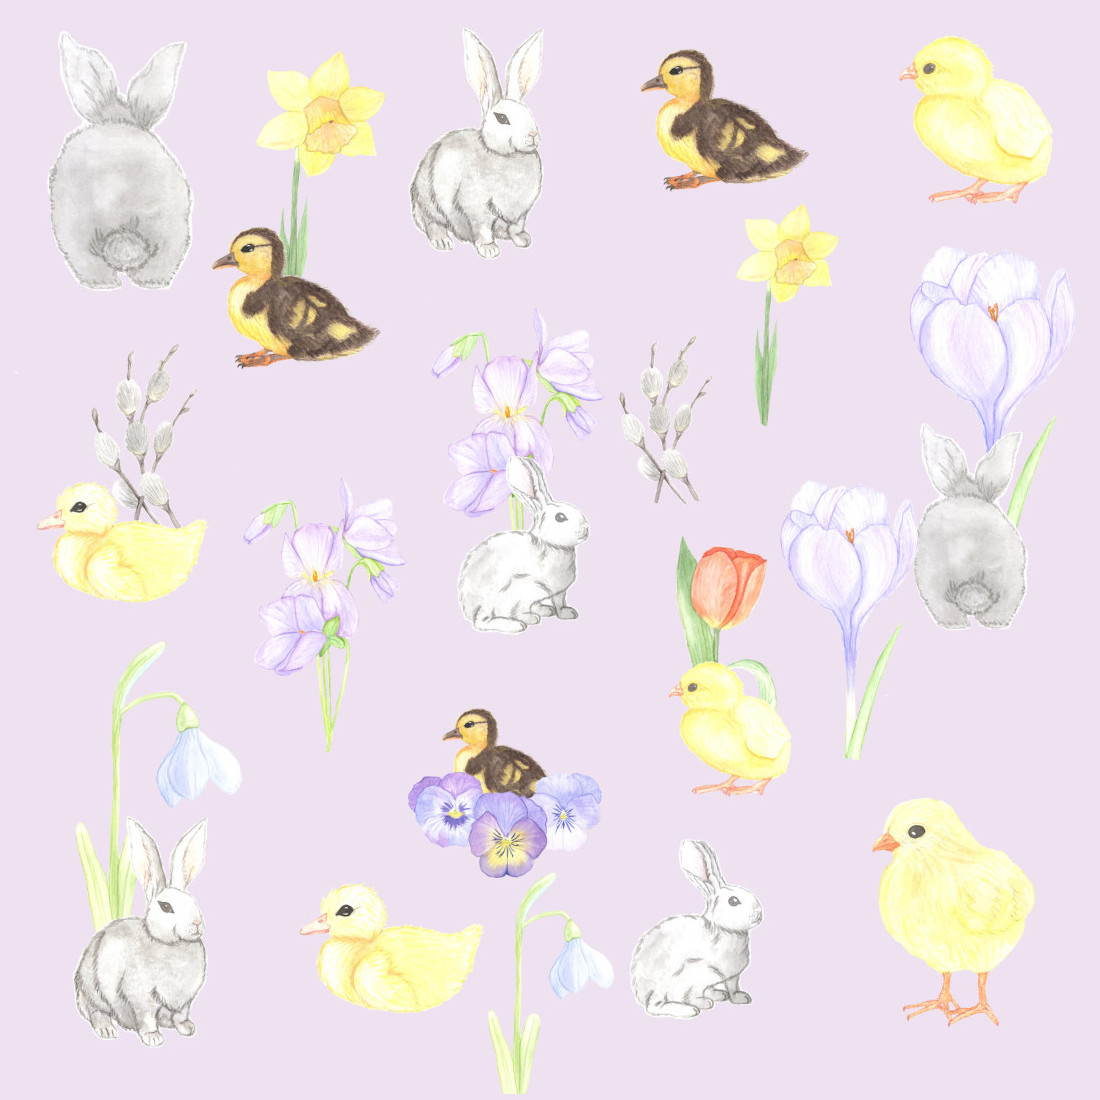 Cute Animals and Spring Flowers Collection cover image.